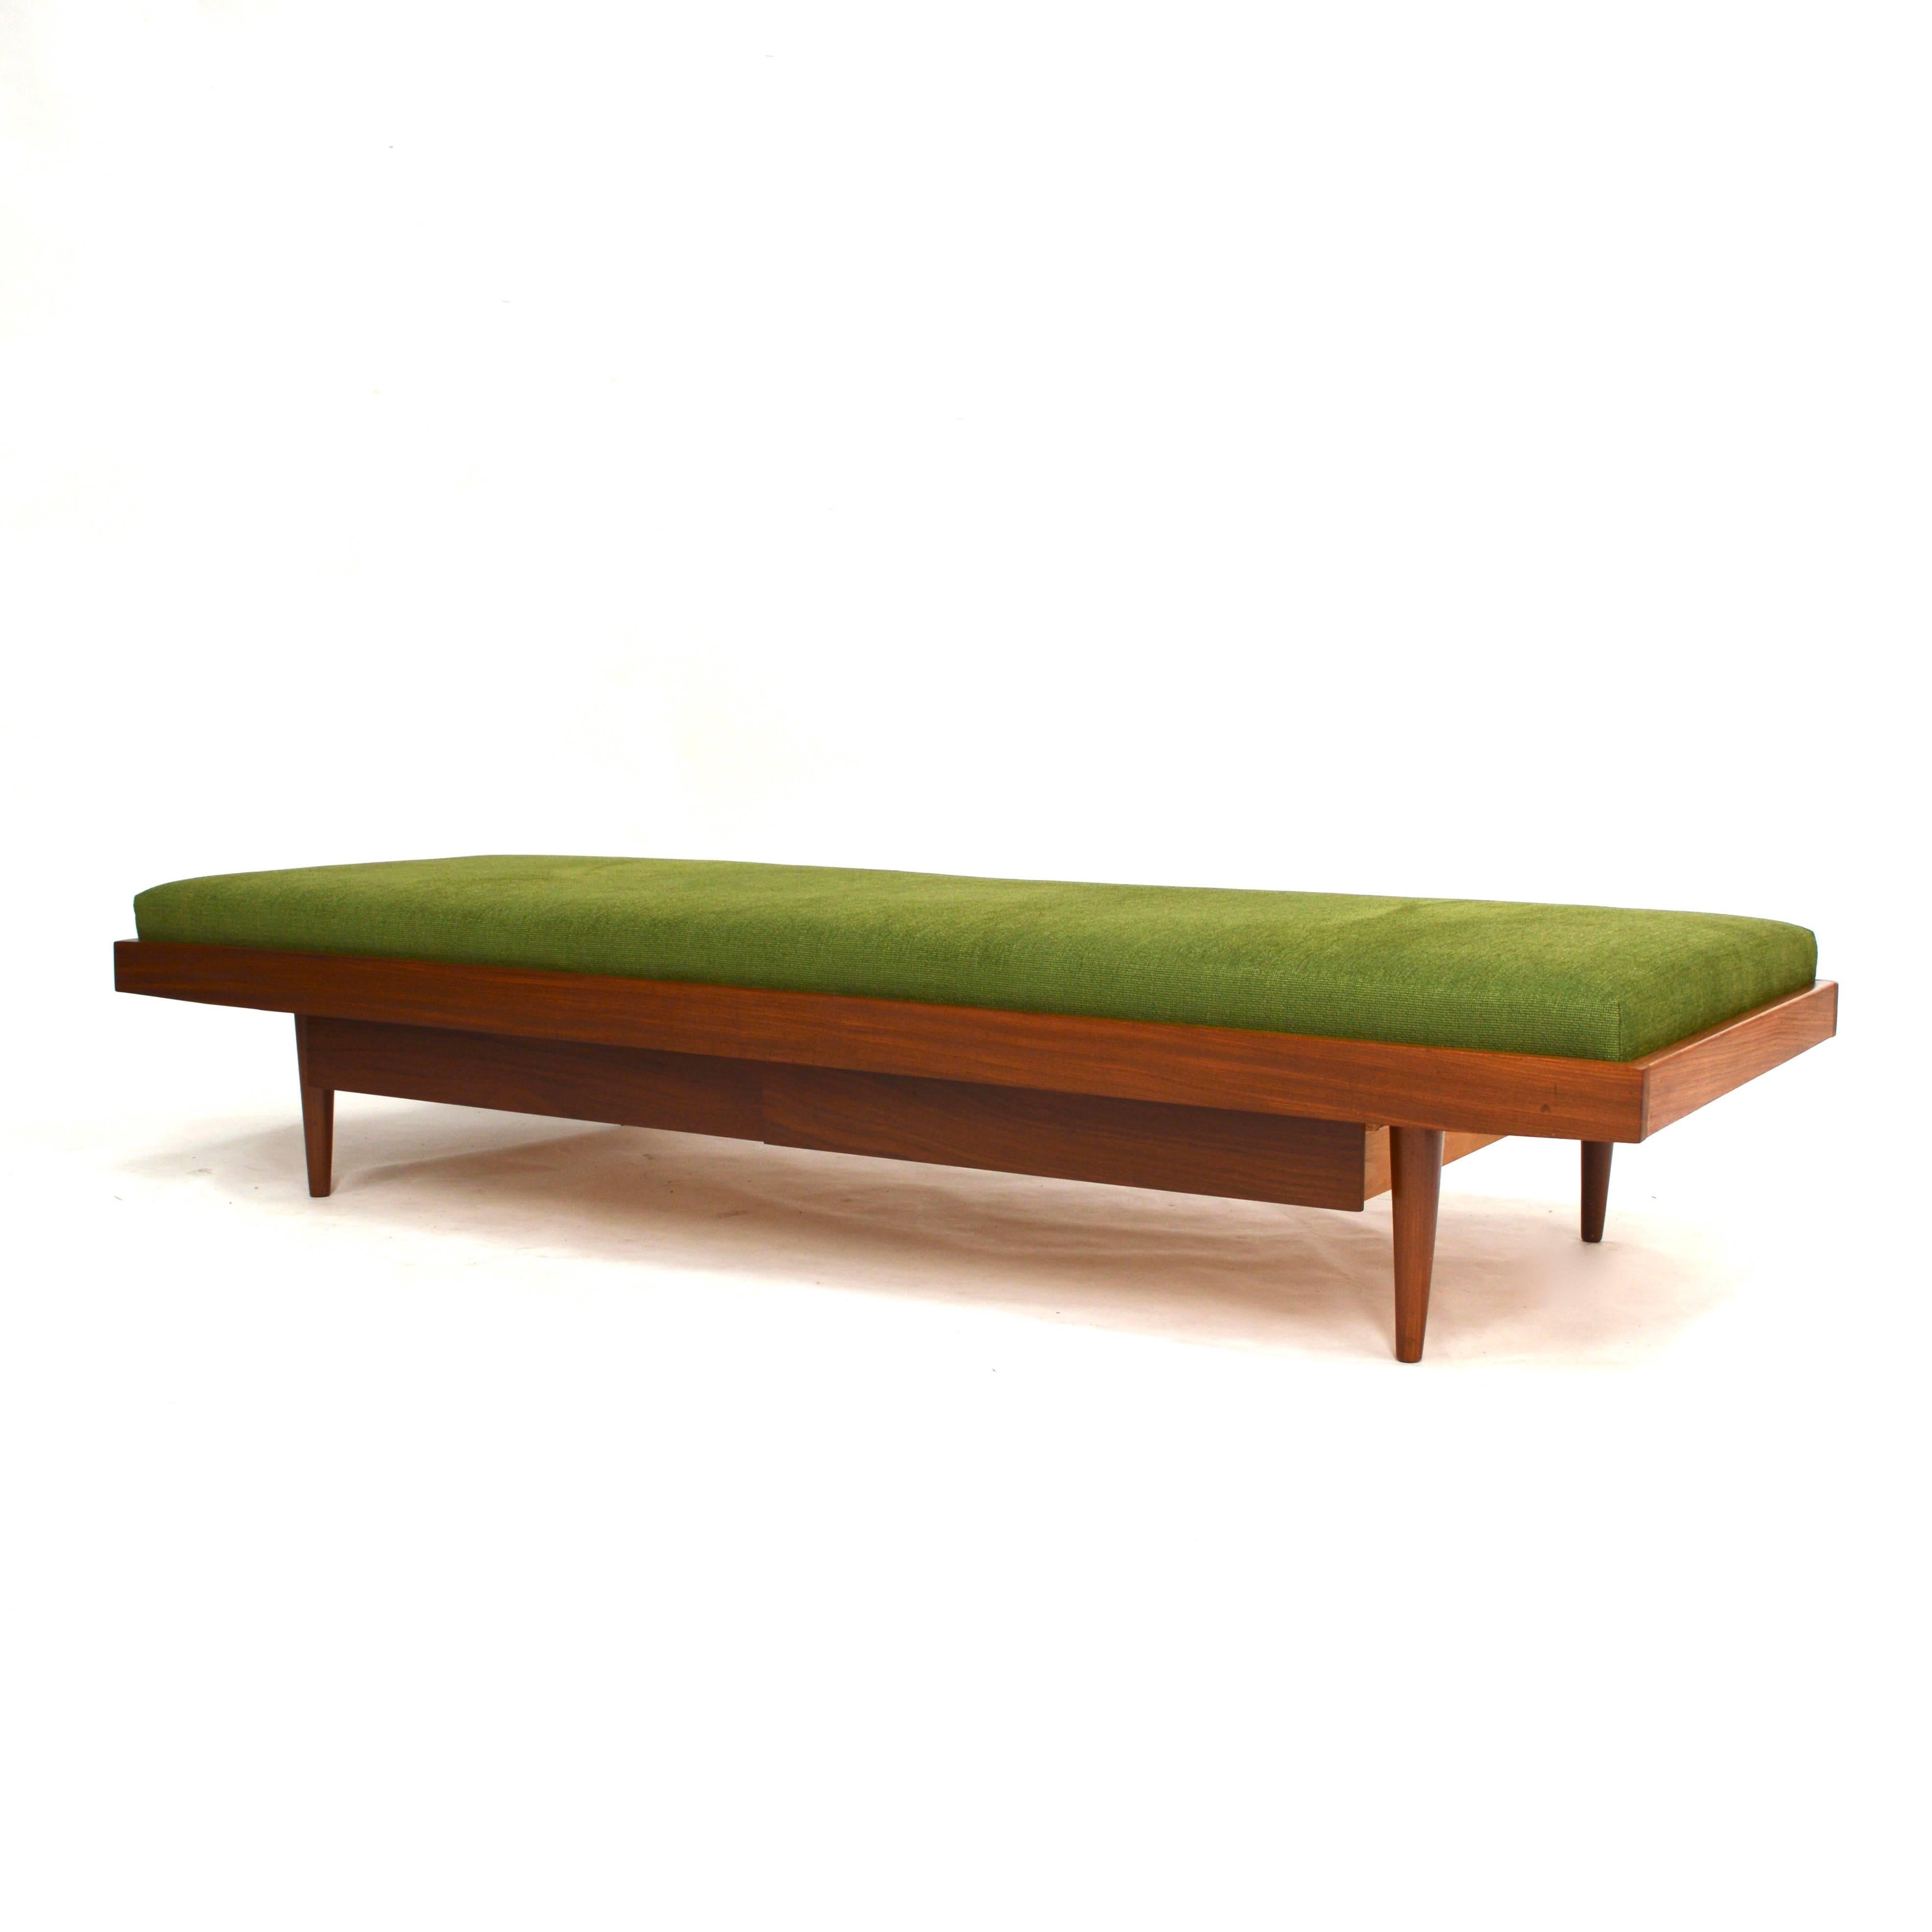 Scandinavian Modern Teak Mid-Century Daybed with Two Drawers New Upholstery